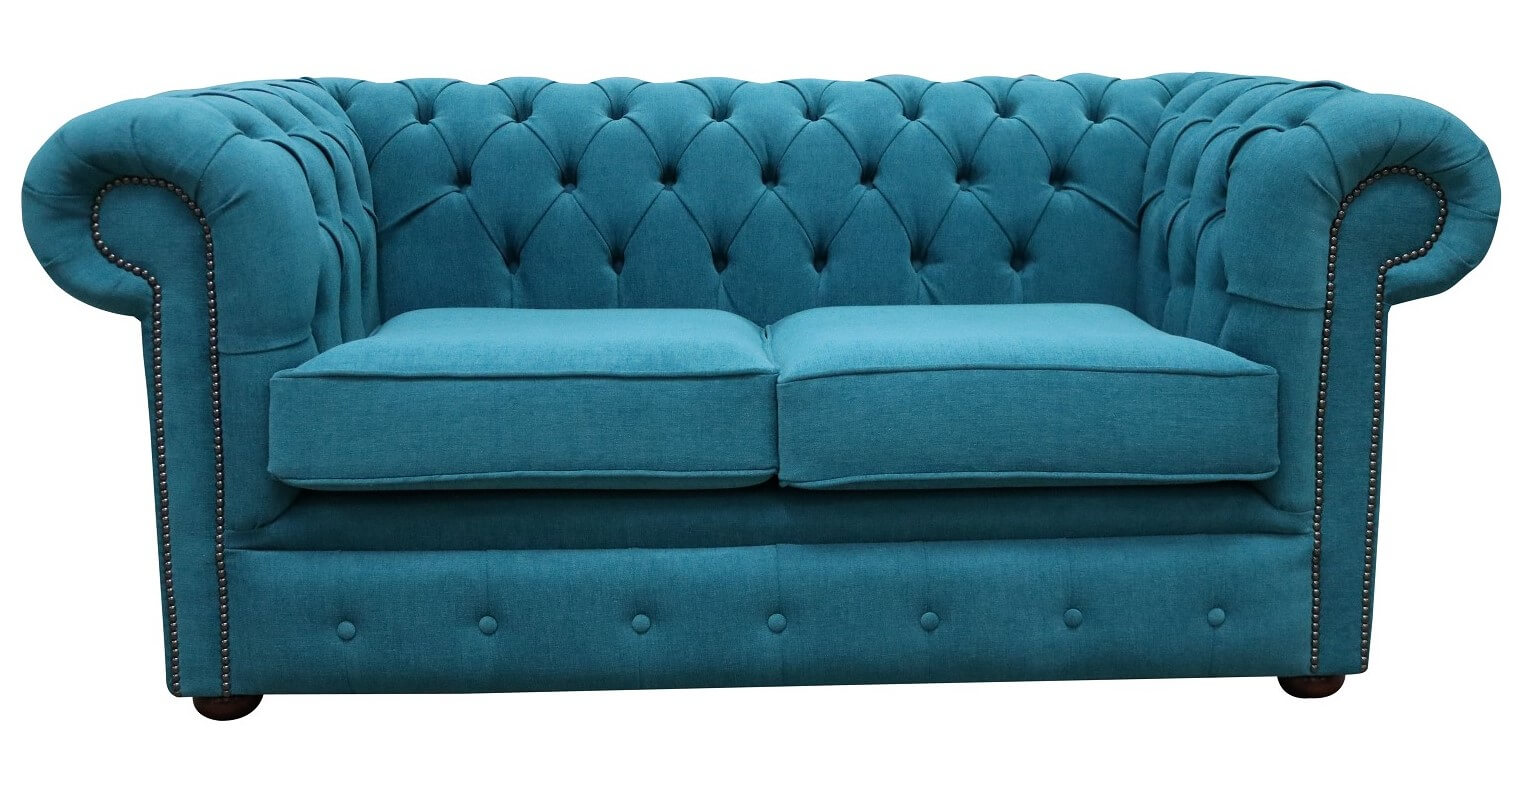 Canadian Classics Chesterfield Sofas Across the Nation  %Post Title